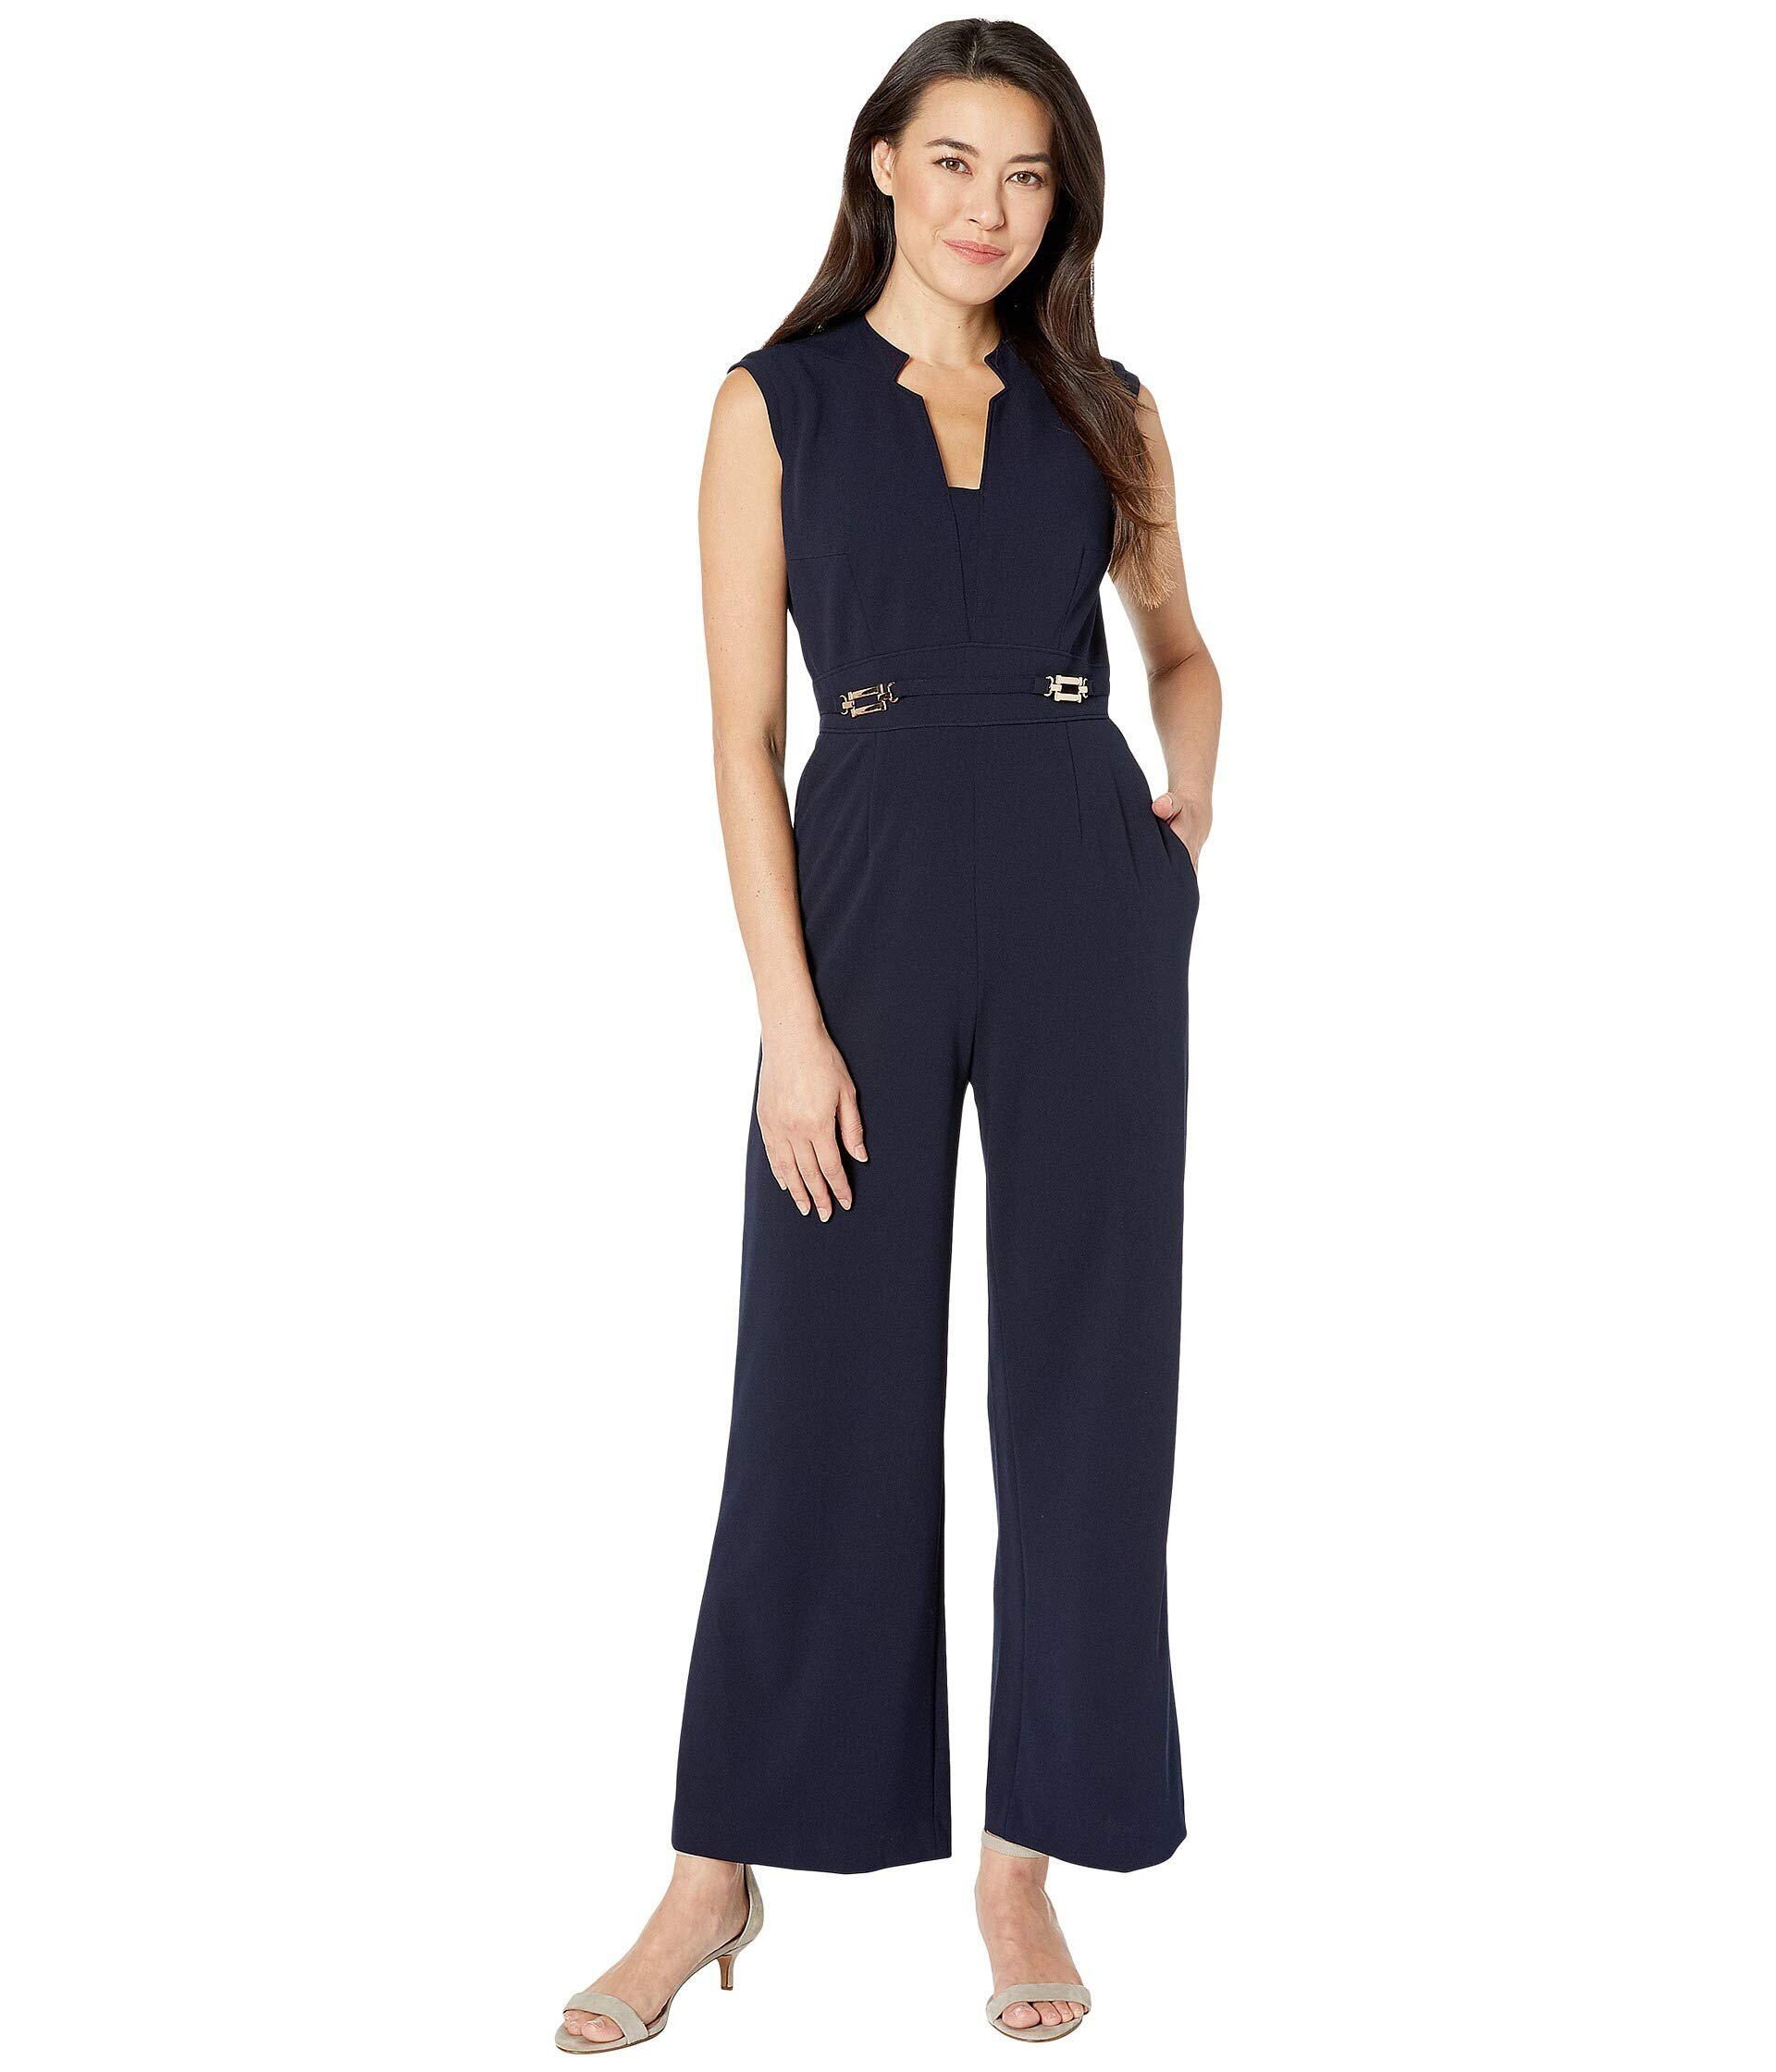 9 Must Know Tips to Find the Best Petite Jumpsuit - #Find #Jumpsuit #Petite  #Tips | Petite jumpsuit, Fashion for petite women, Dress for petite women